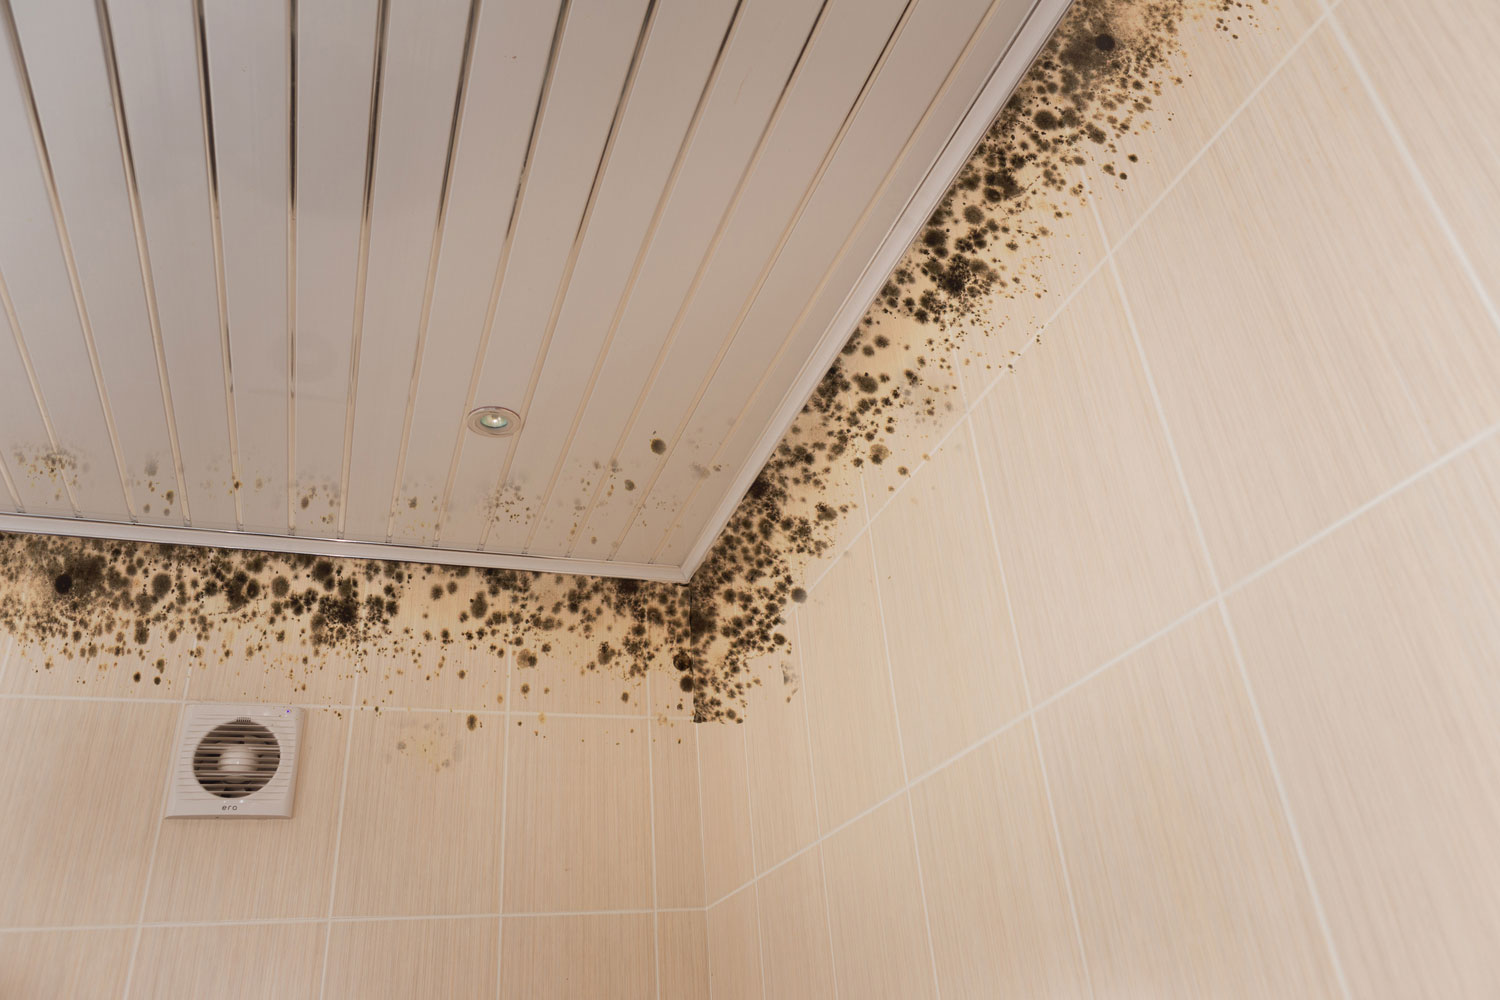 How to Remove Mold in Your Shower